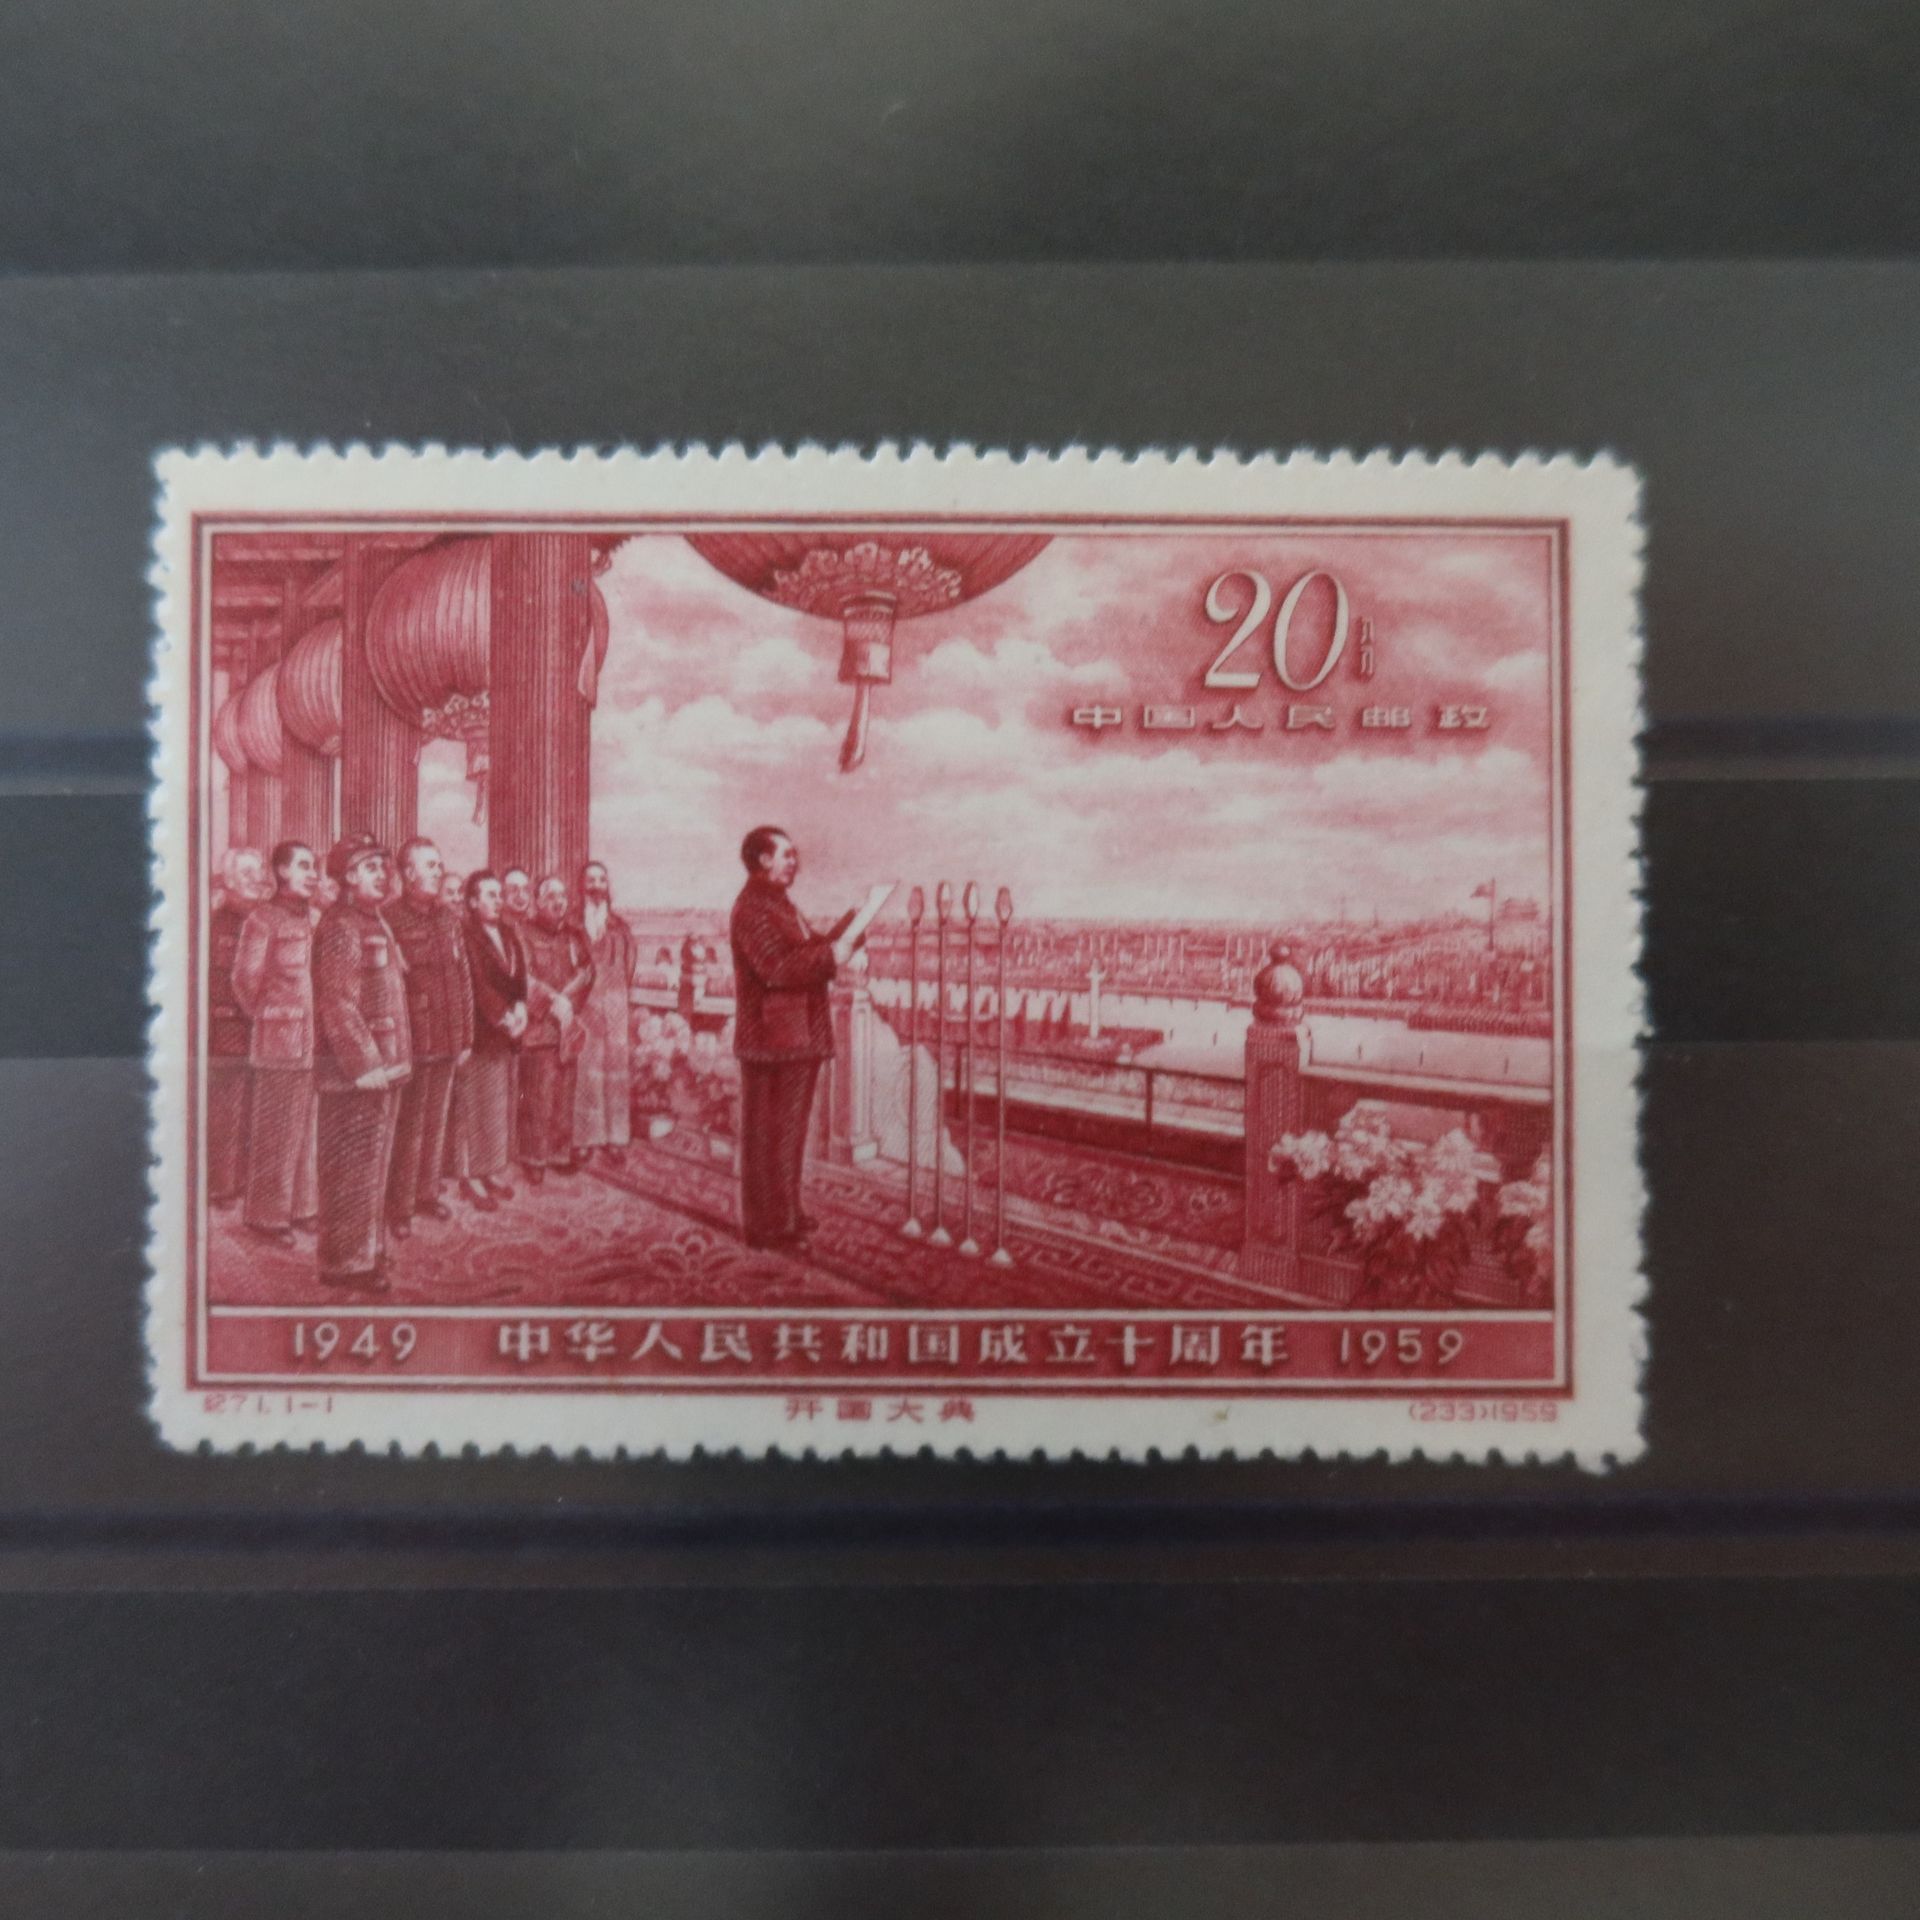 Null [CHINA]
Superb No. 1242 "20th 10th Anniversary of the Republic", new and Su&hellip;